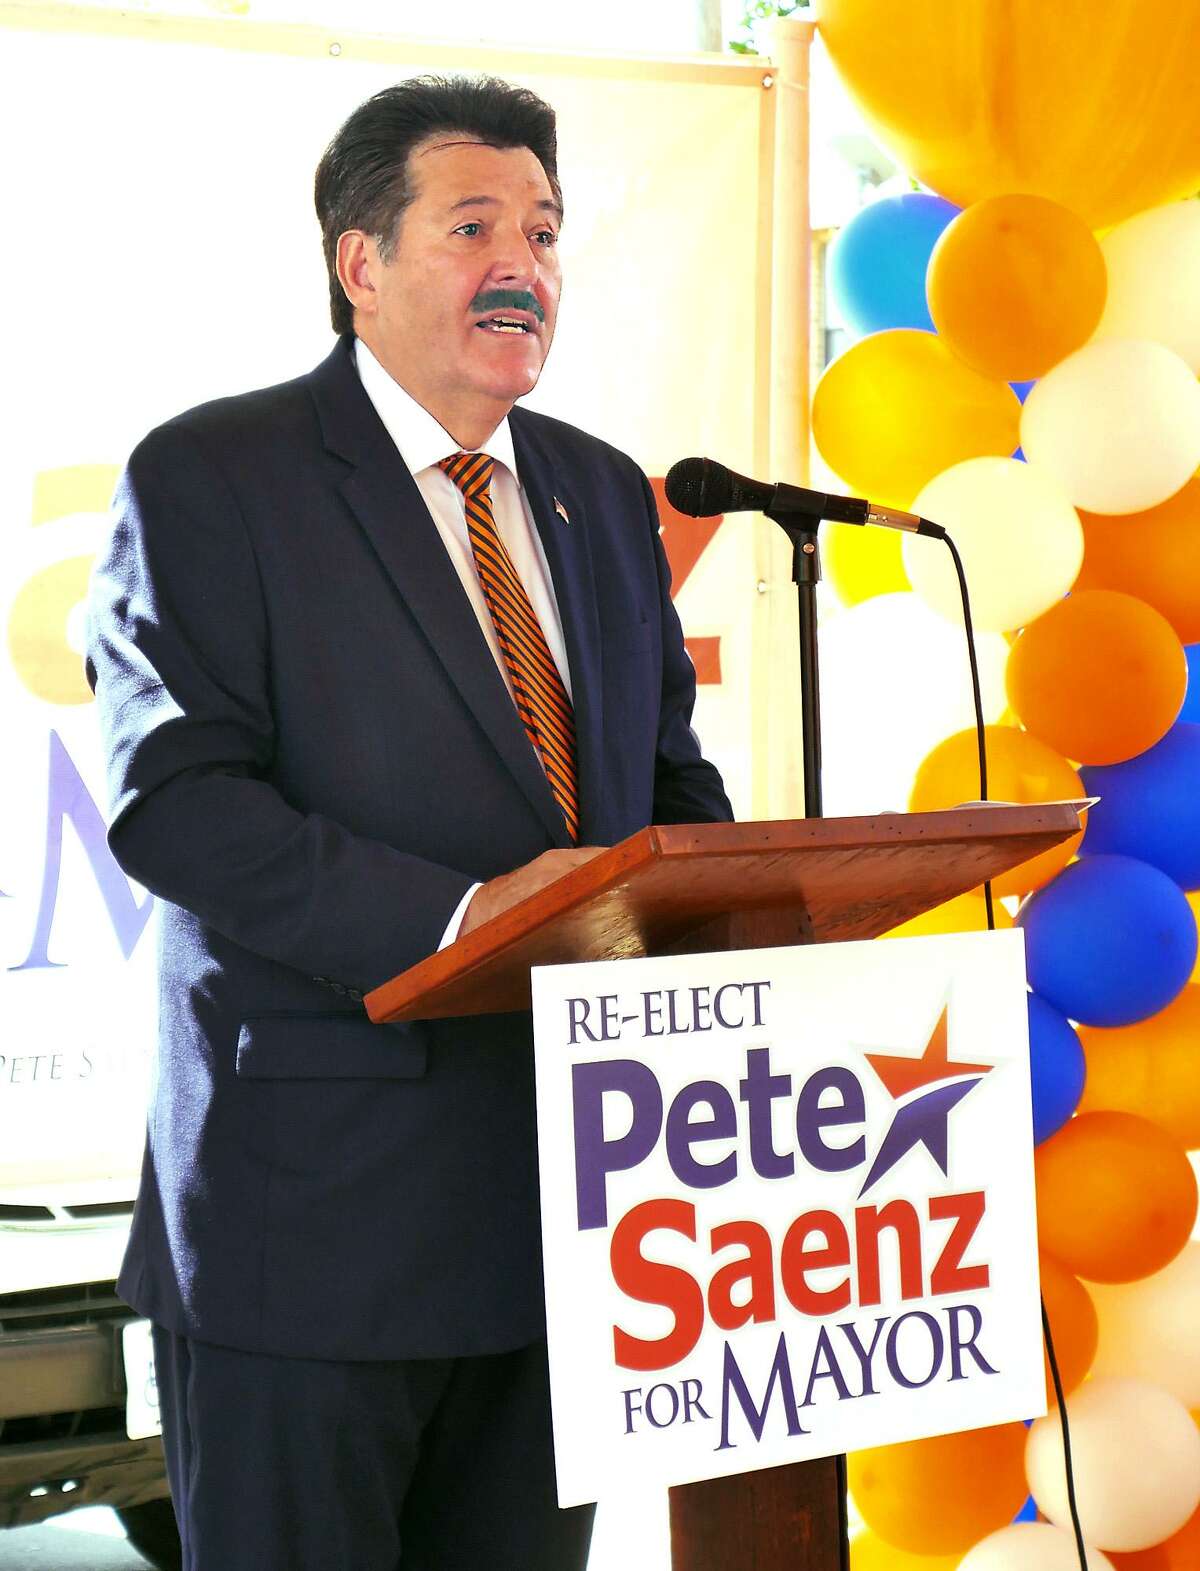 Laredo Mayor Pete Saenz announced his bid for re-election at a news conference at his campaign headquarters on Tuesday.